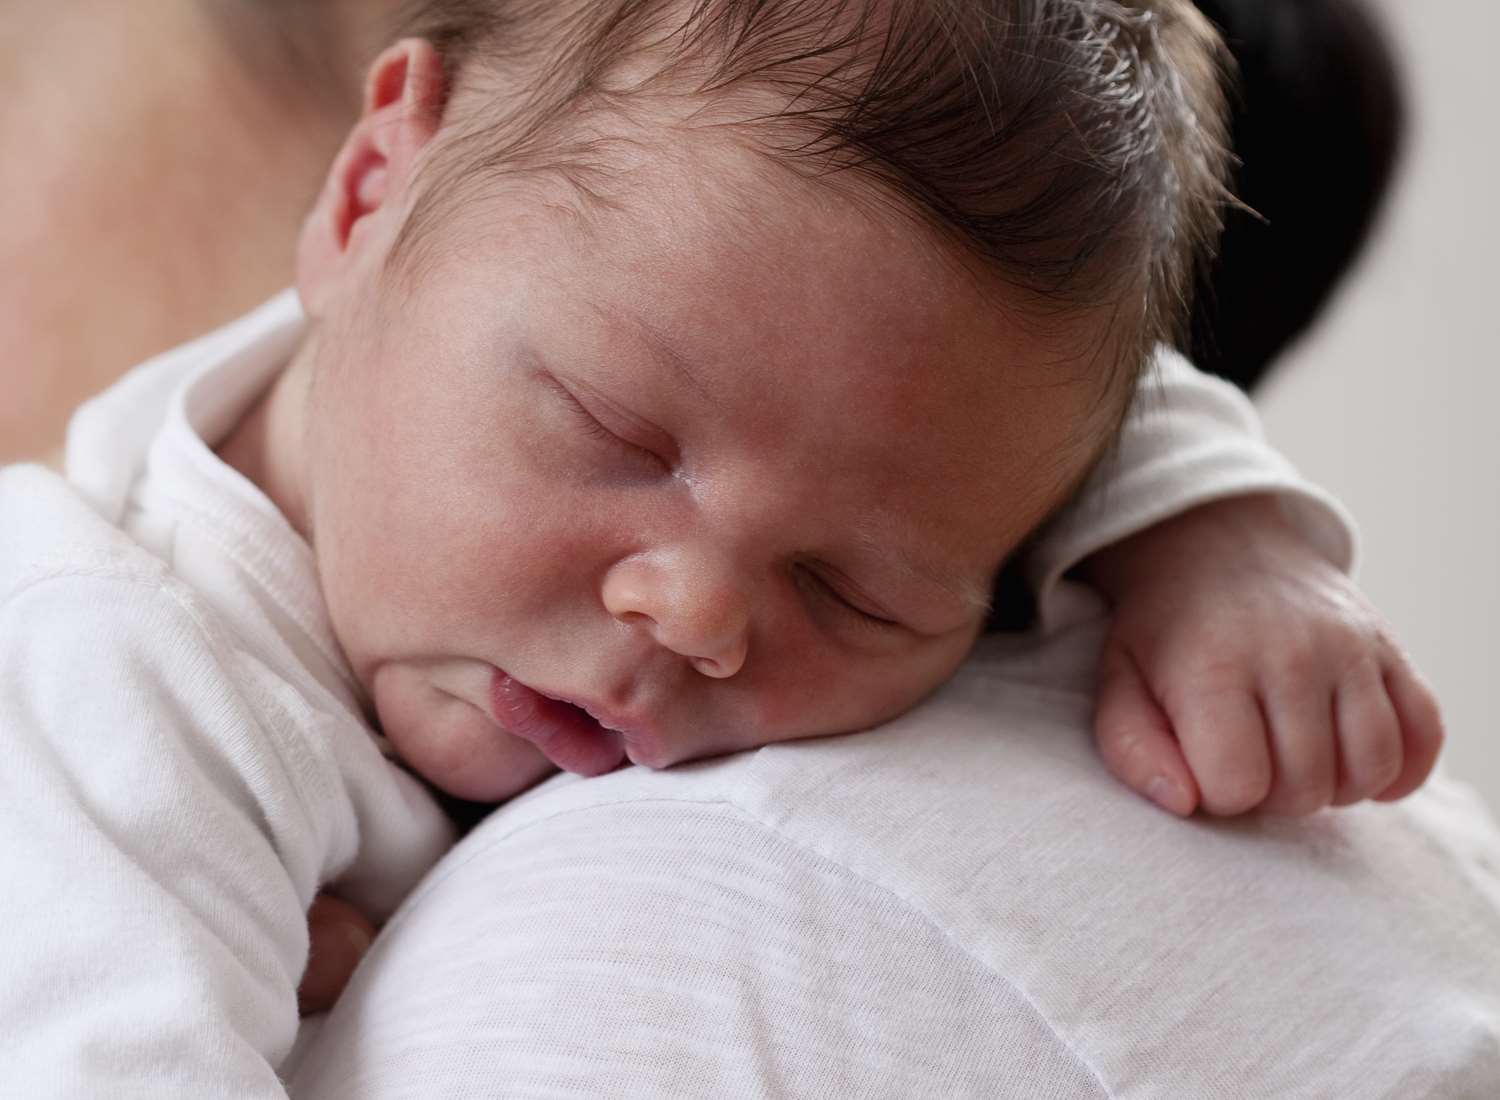 Lack of sleep was named as the biggest reason for finding a baby stage difficult